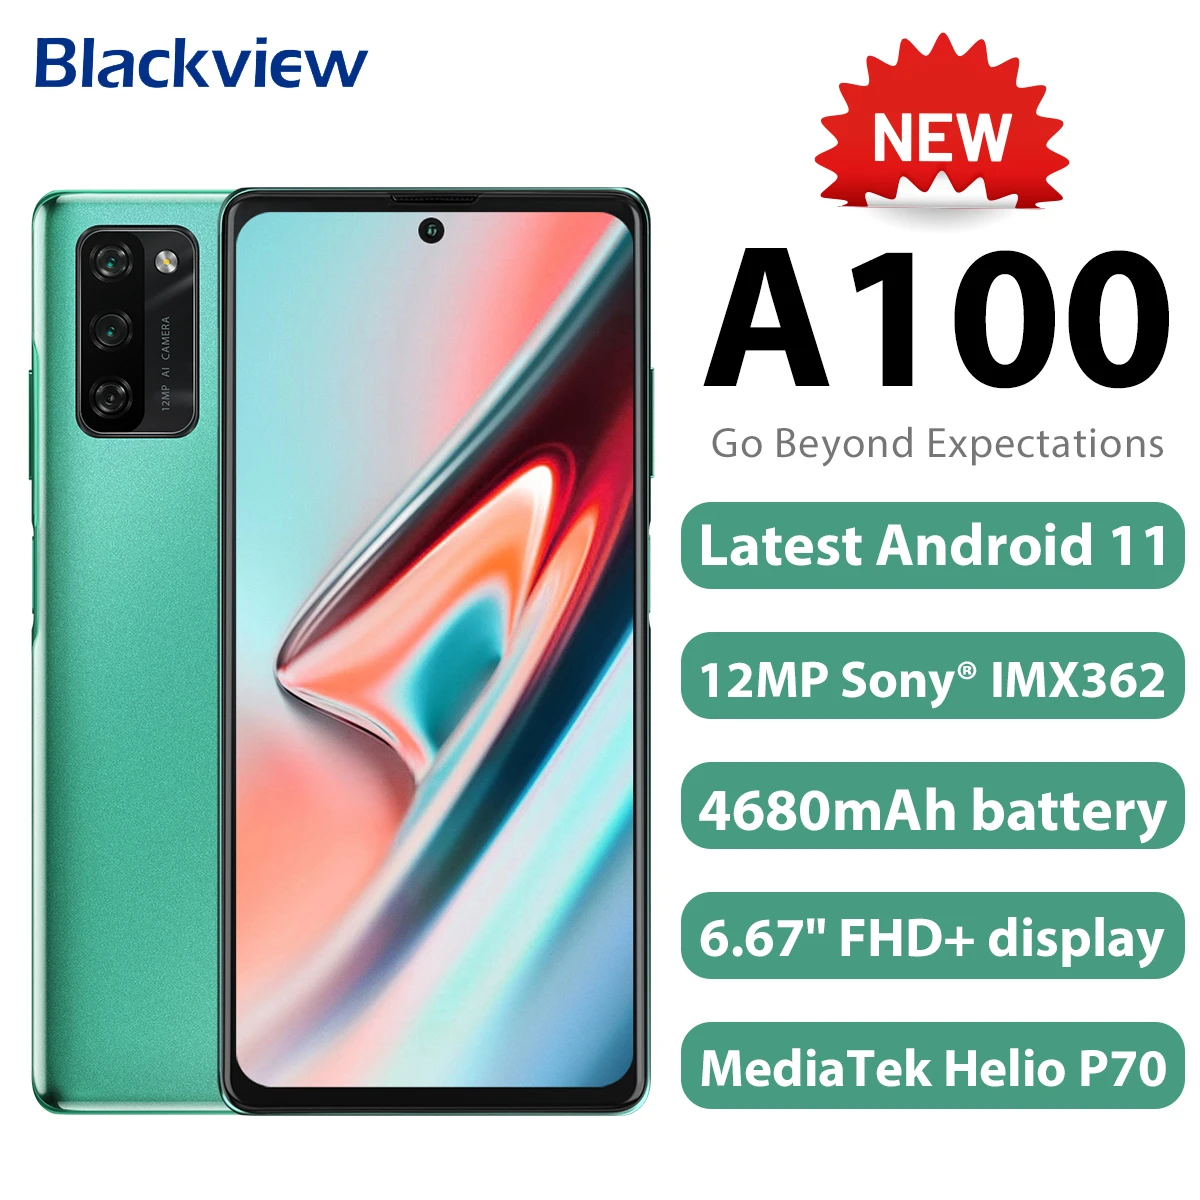 Blackview A100 Smartphone Helio P70 Octa Core 6GB+128GB 12MP HDR Camera Mobile Phone 4680mAh Android 11 Telephone 4G LTE Celular